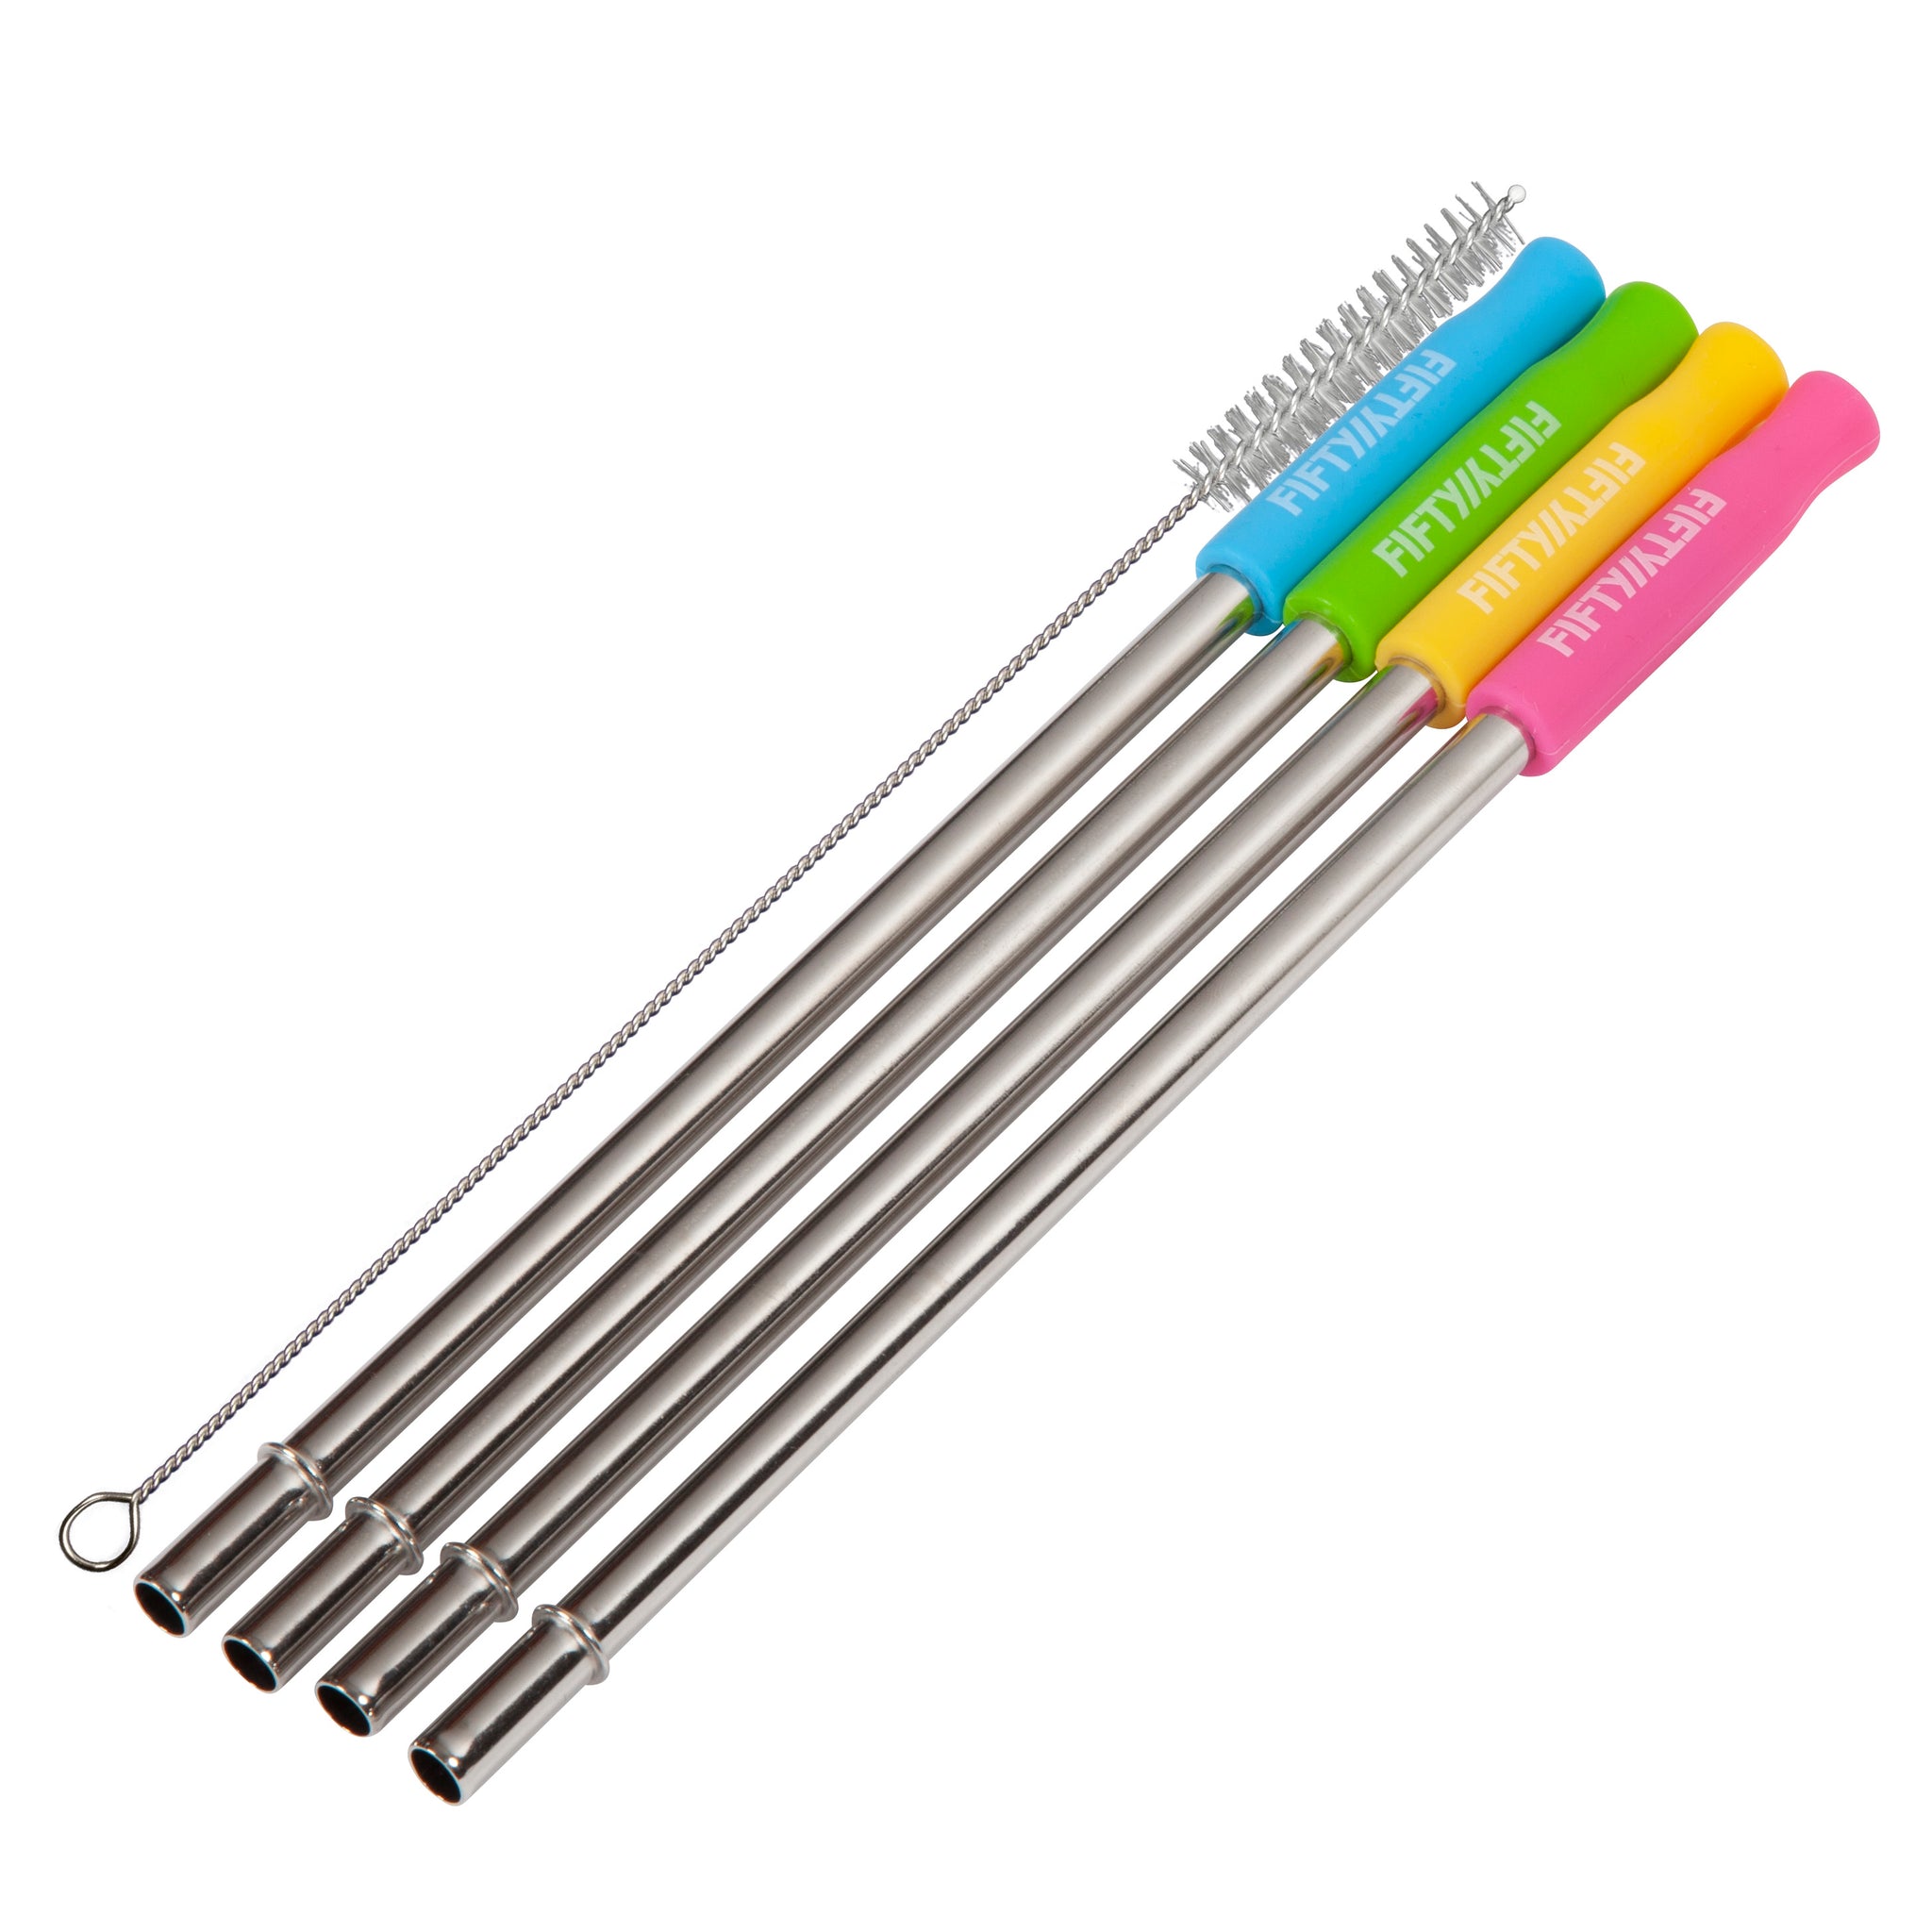 Stainless Steel Straws | Reusable Stainless Steel Straws | ECOMENDED